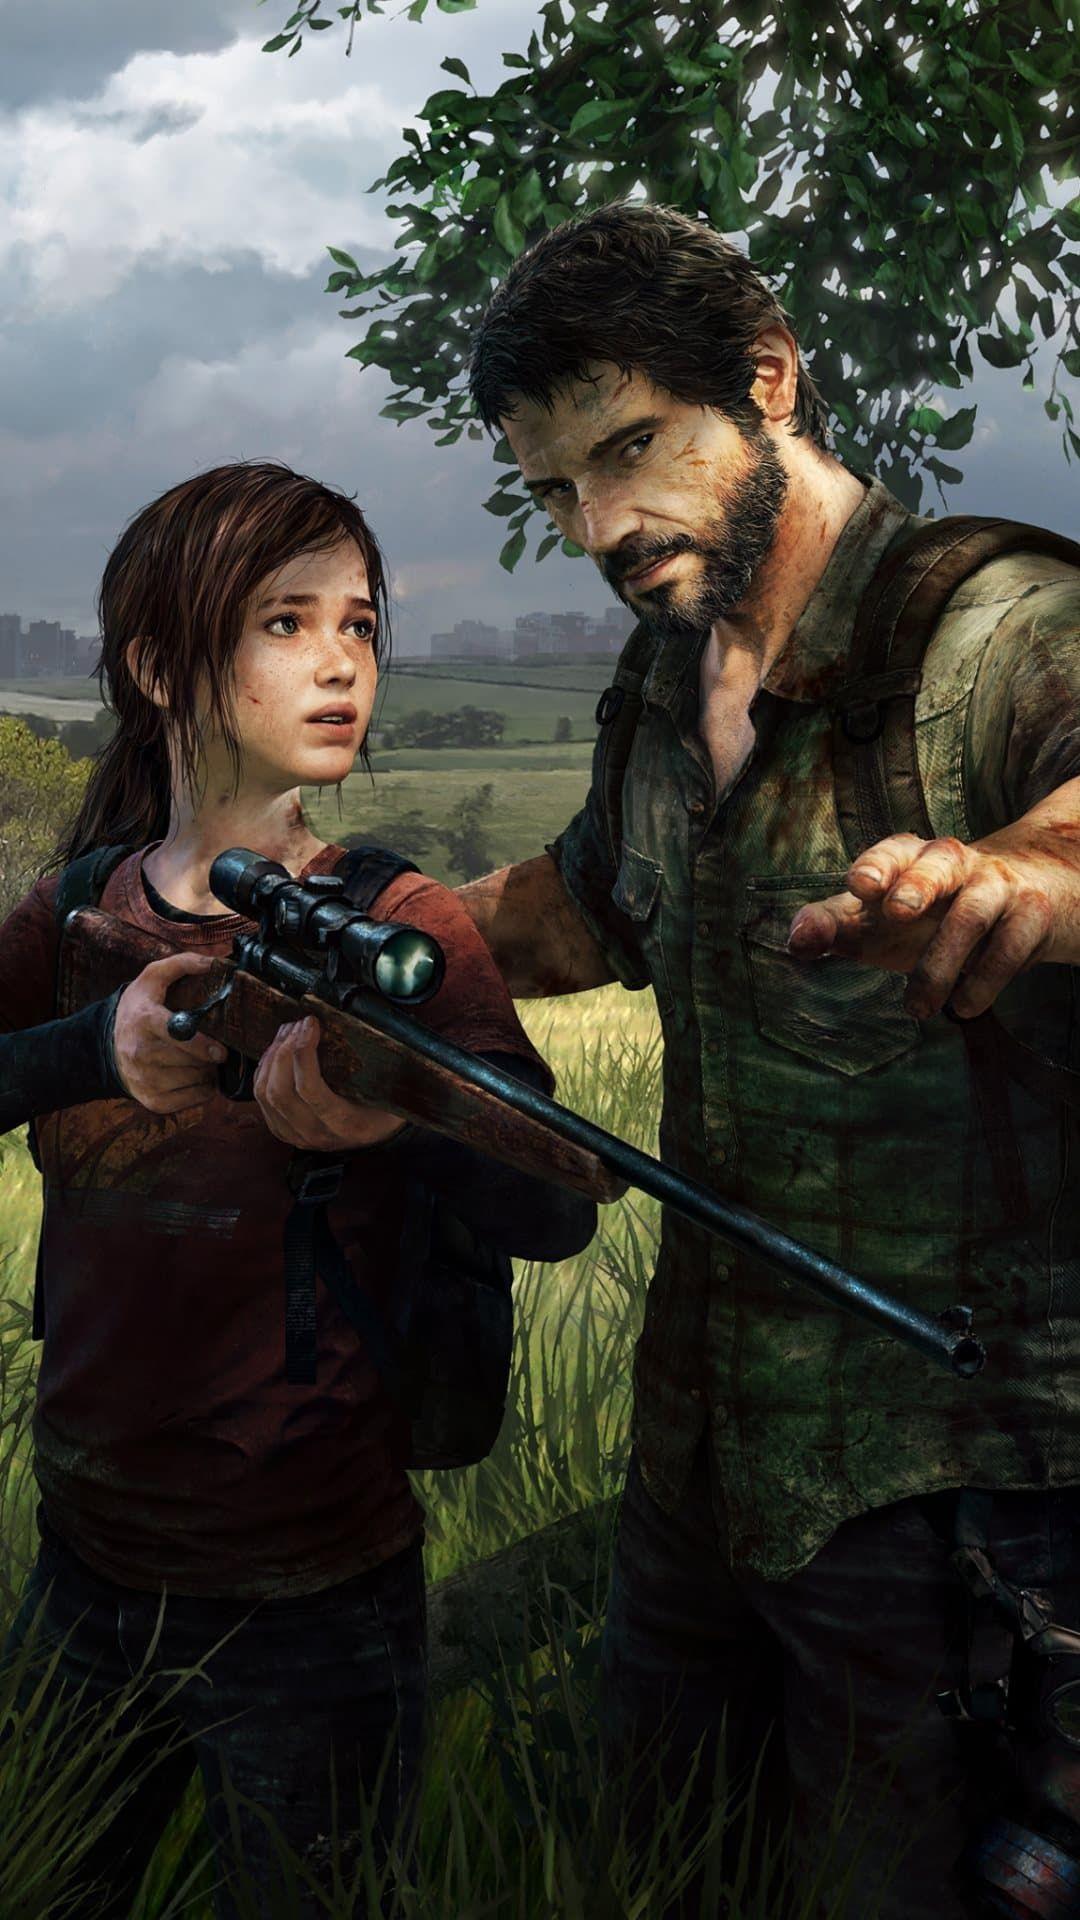 It can't be for nothing': EW discusses 'The Last of Us